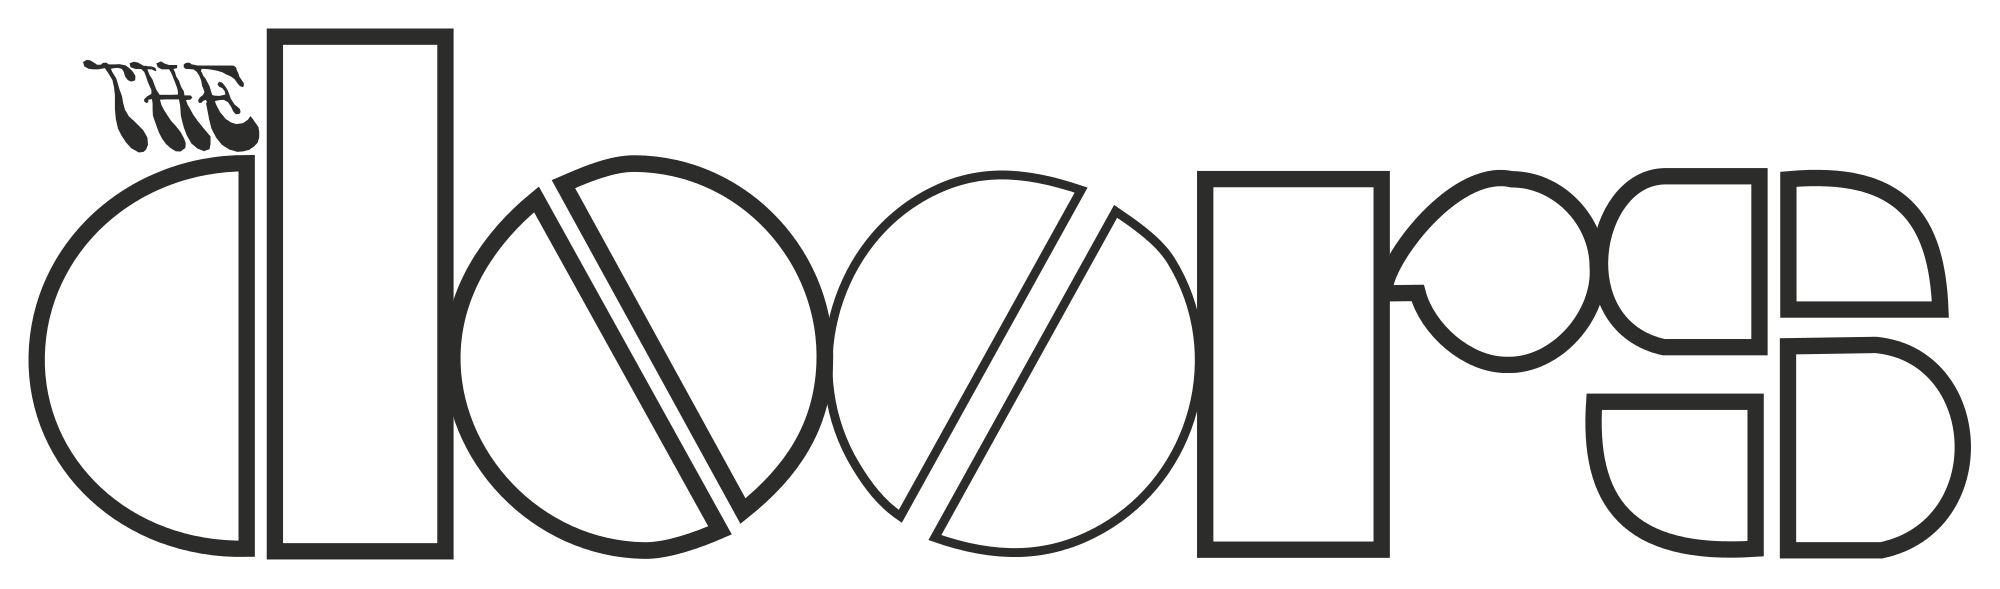 The Doors Logo - File:Thedoors-logo.svg - Wikimedia Commons